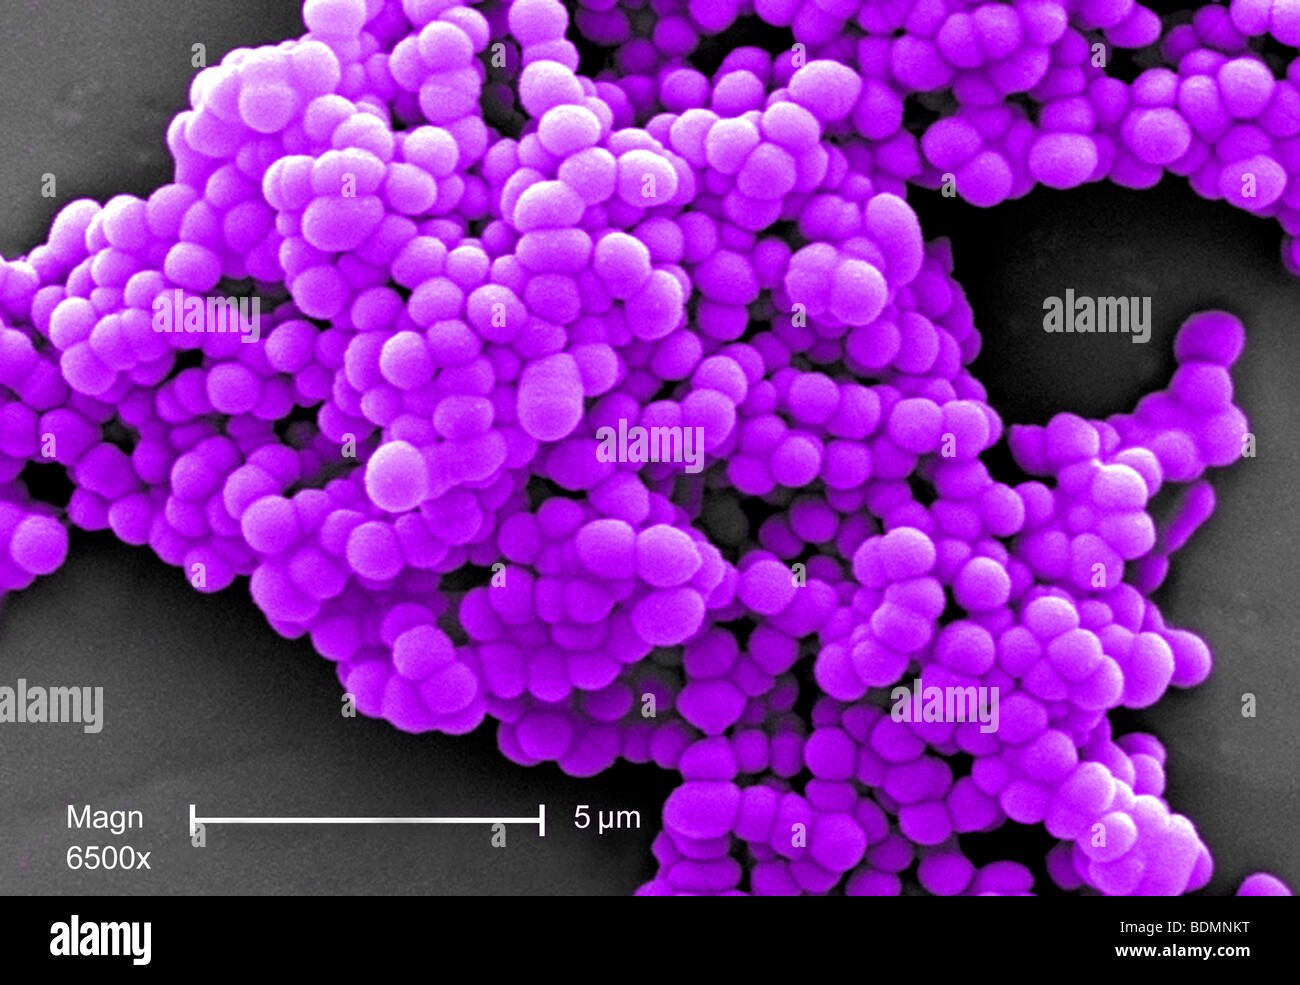 scanning electron micrograph (SEM) of clusters of Gram-positive, beta-hemolytic Group C Streptococcus sp. bacteria Stock Photo